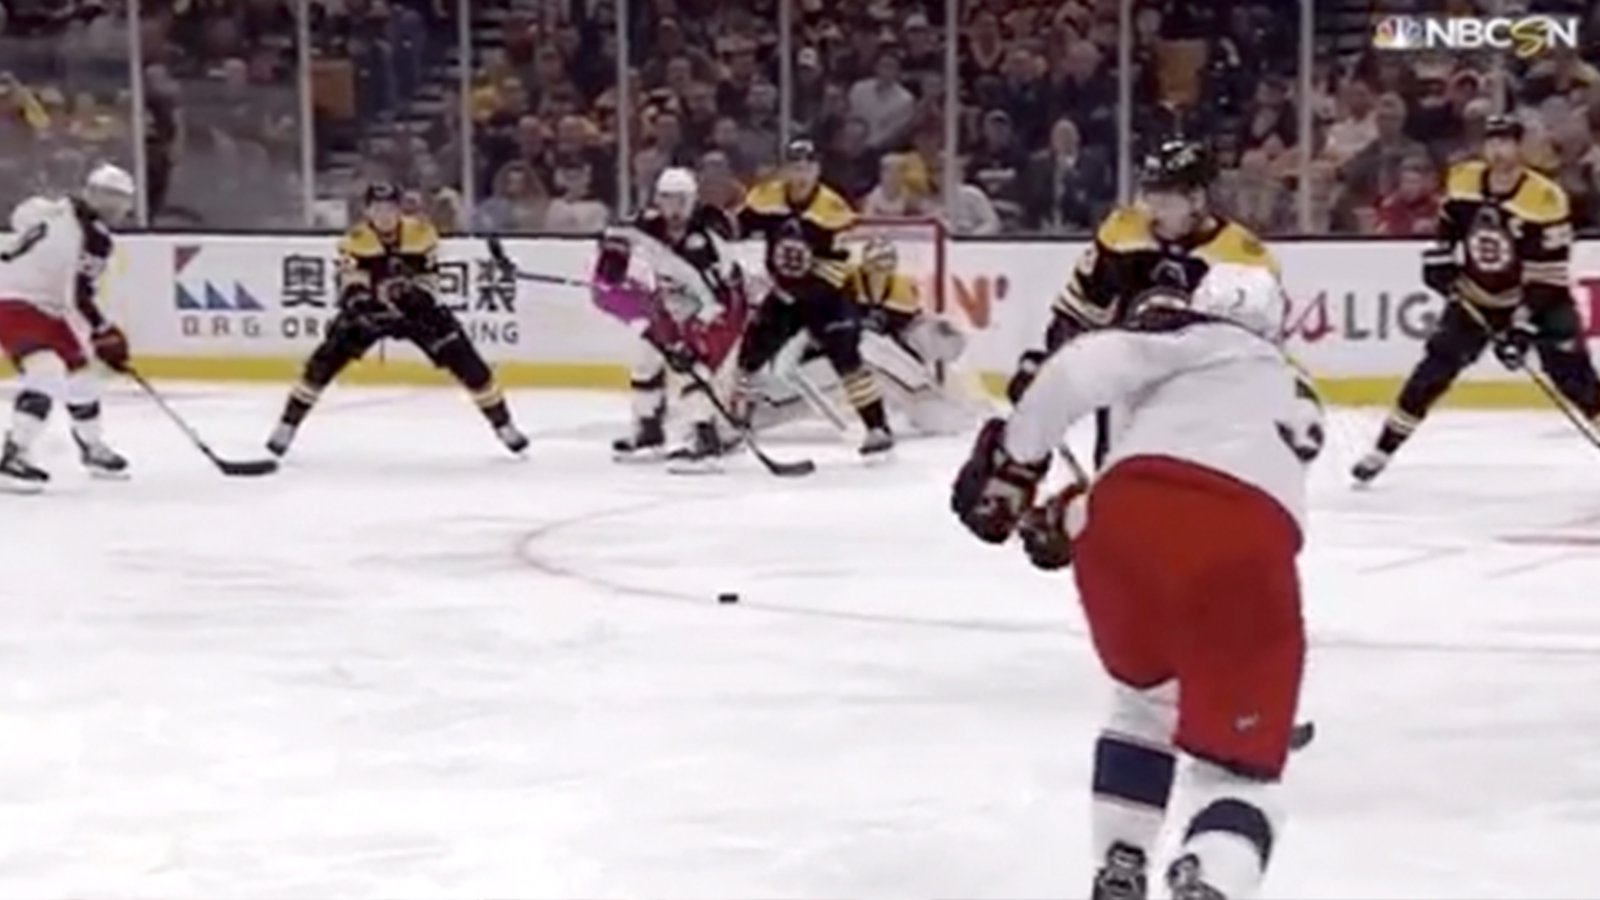 Columbus scores two goals in 13 seconds to stun the Bruins